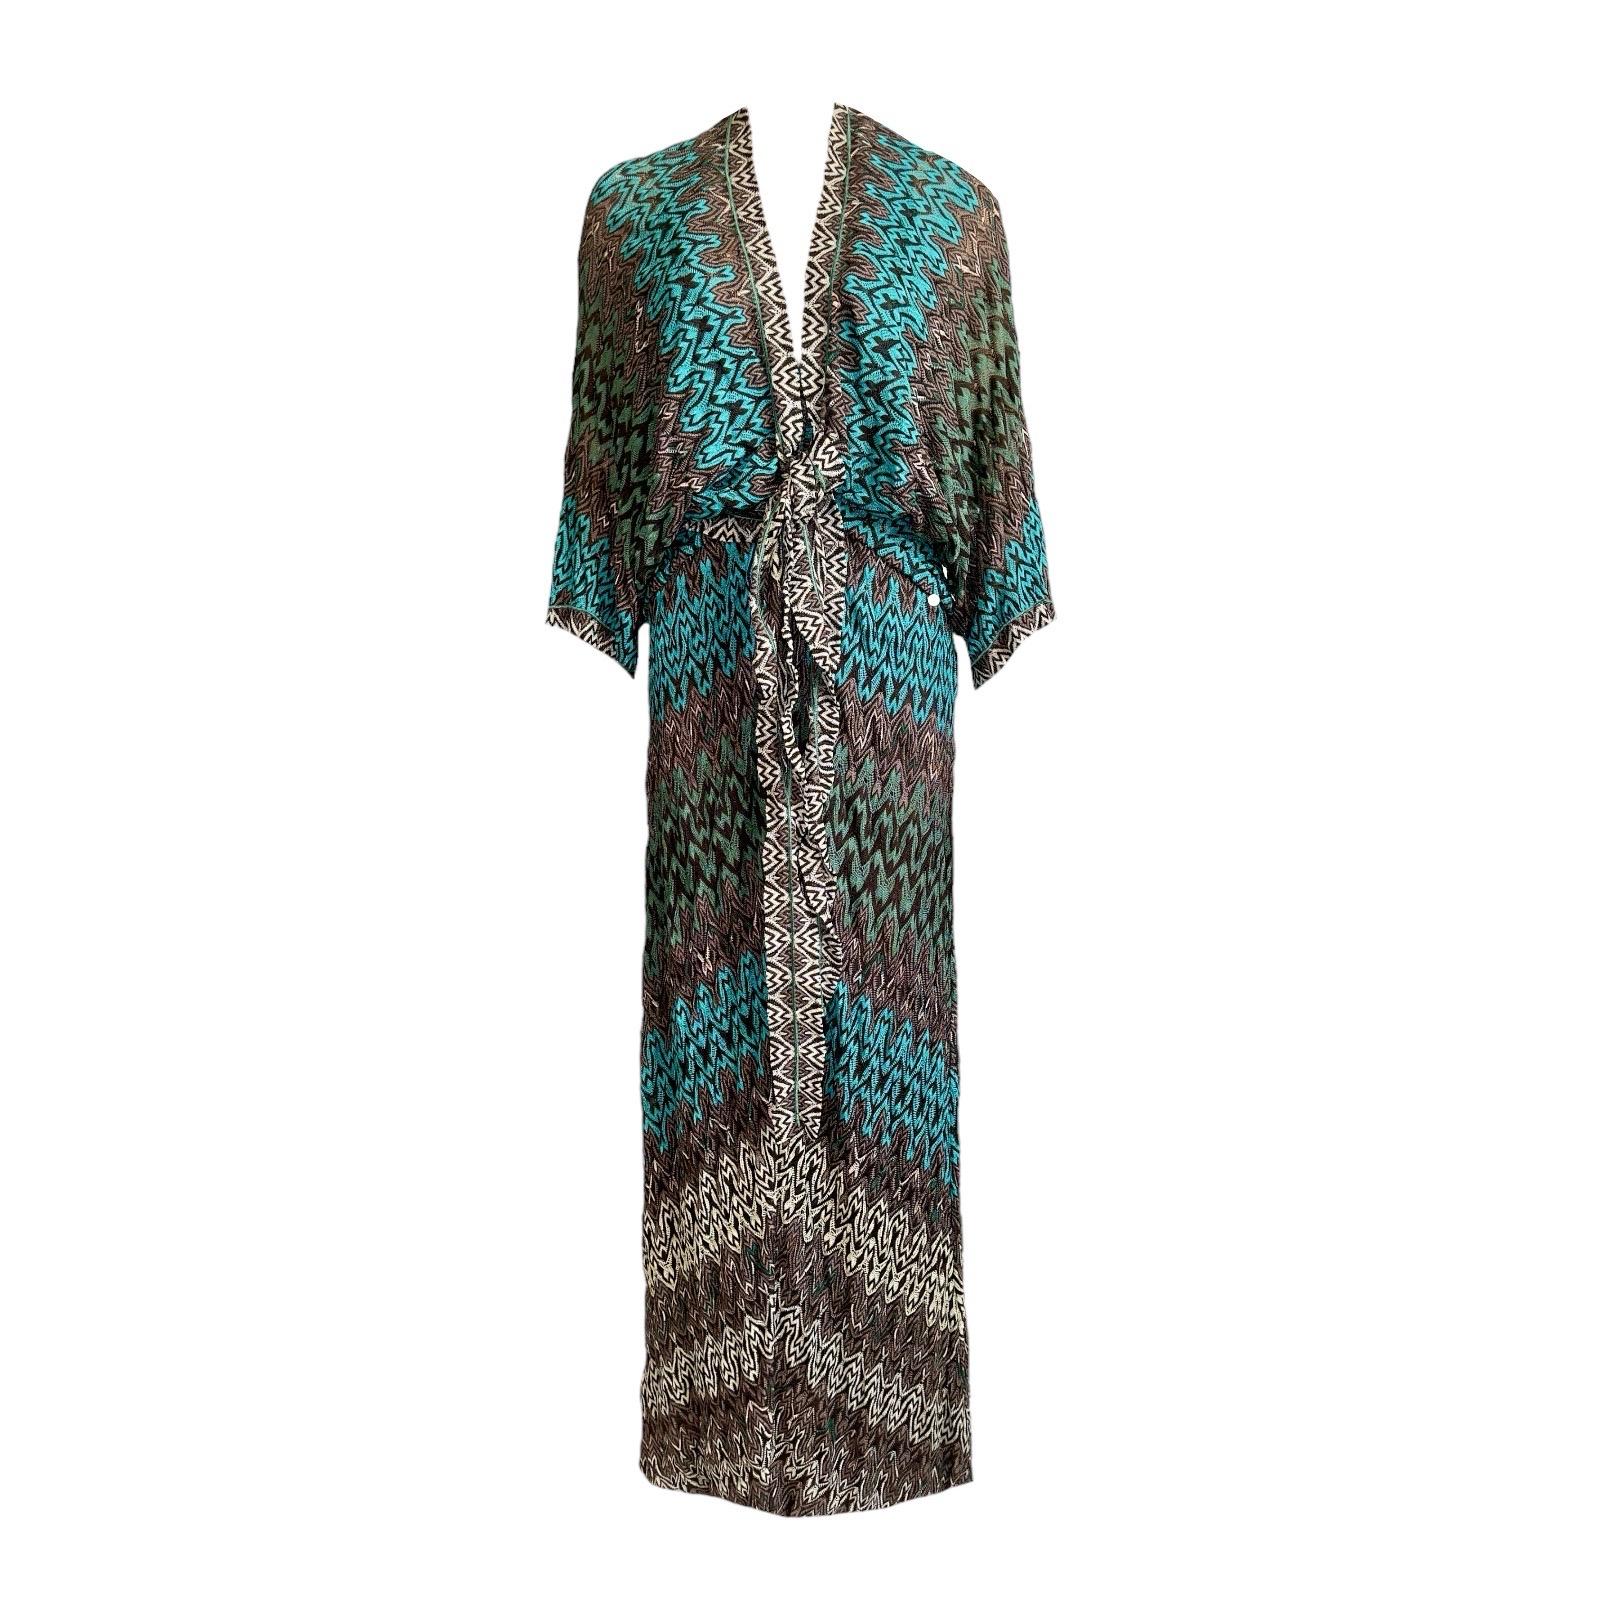 NEW Missoni 2PC Dramatic Deep Neck Crochet Knit Evening Dress Gown & Cardigan 40 For Sale 2